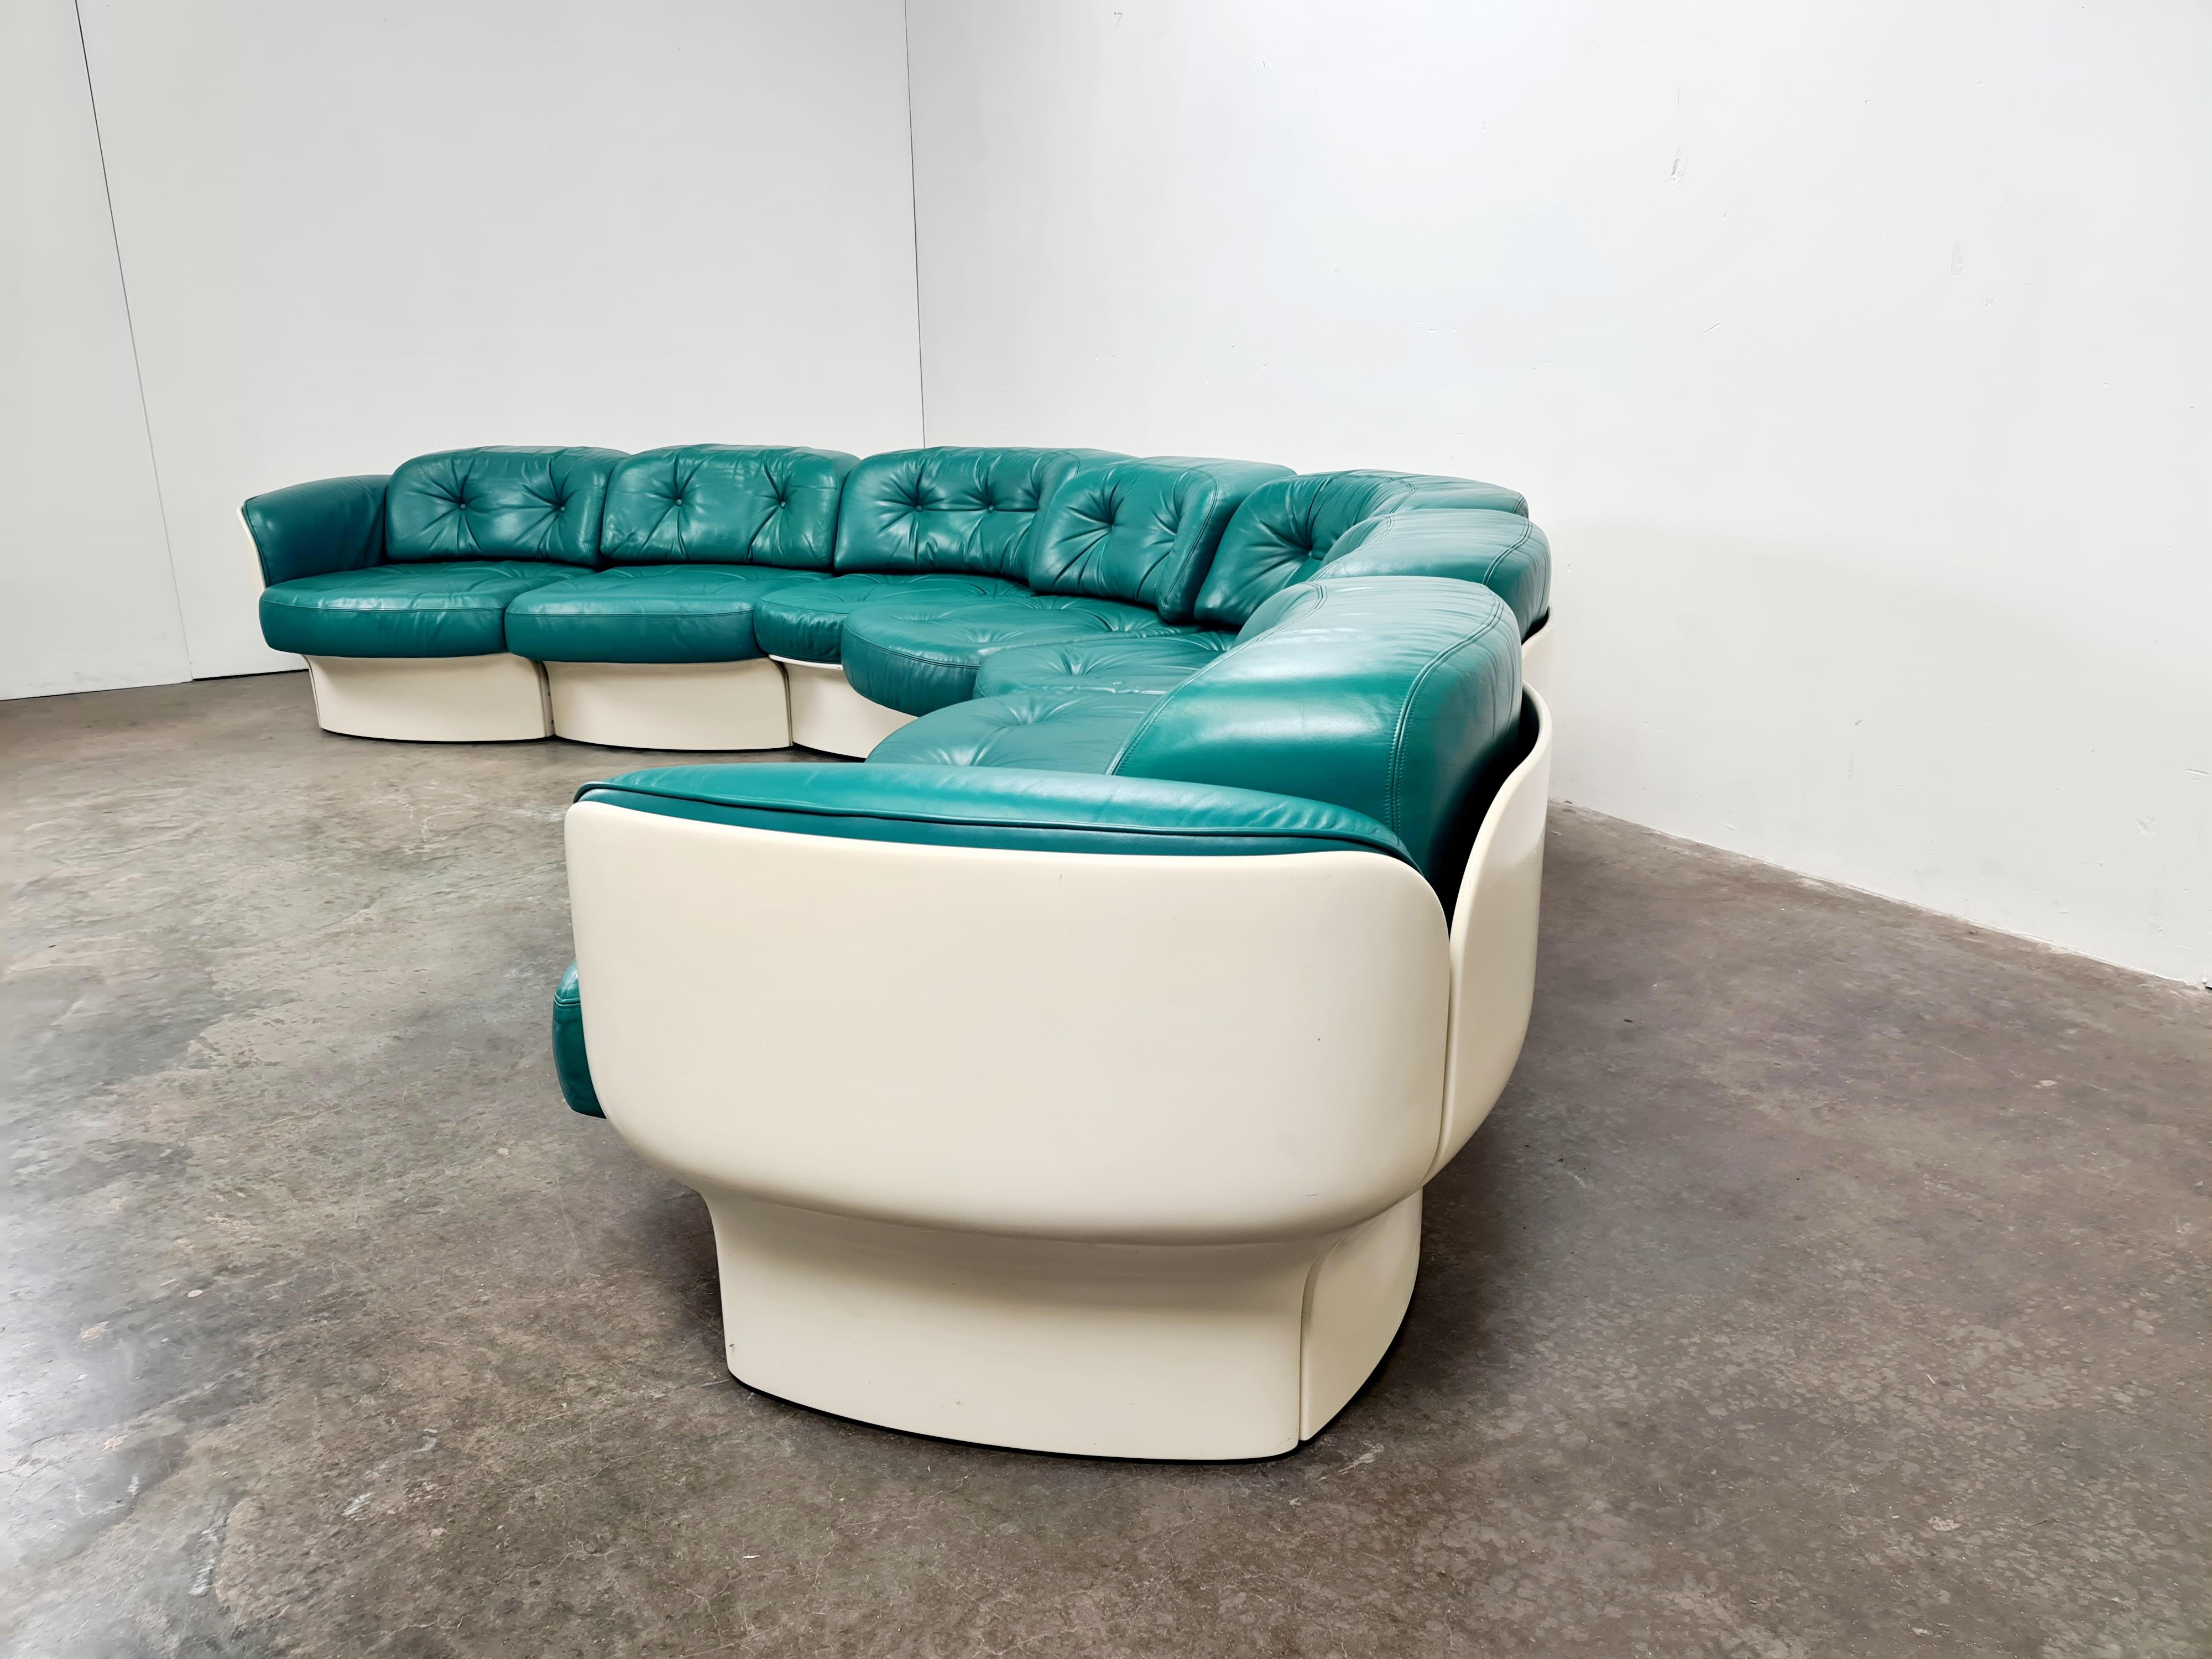 Peter Ghyczy, sectional sofa, Space Age, turquoise leather, 

Prototype sectional couch in leather and polyurethan
Designed by Peter Ghyczy, manufactured at the Lemförde Design Centre, Germany, 1968-1971, moulded polyurethane parts, hand painted